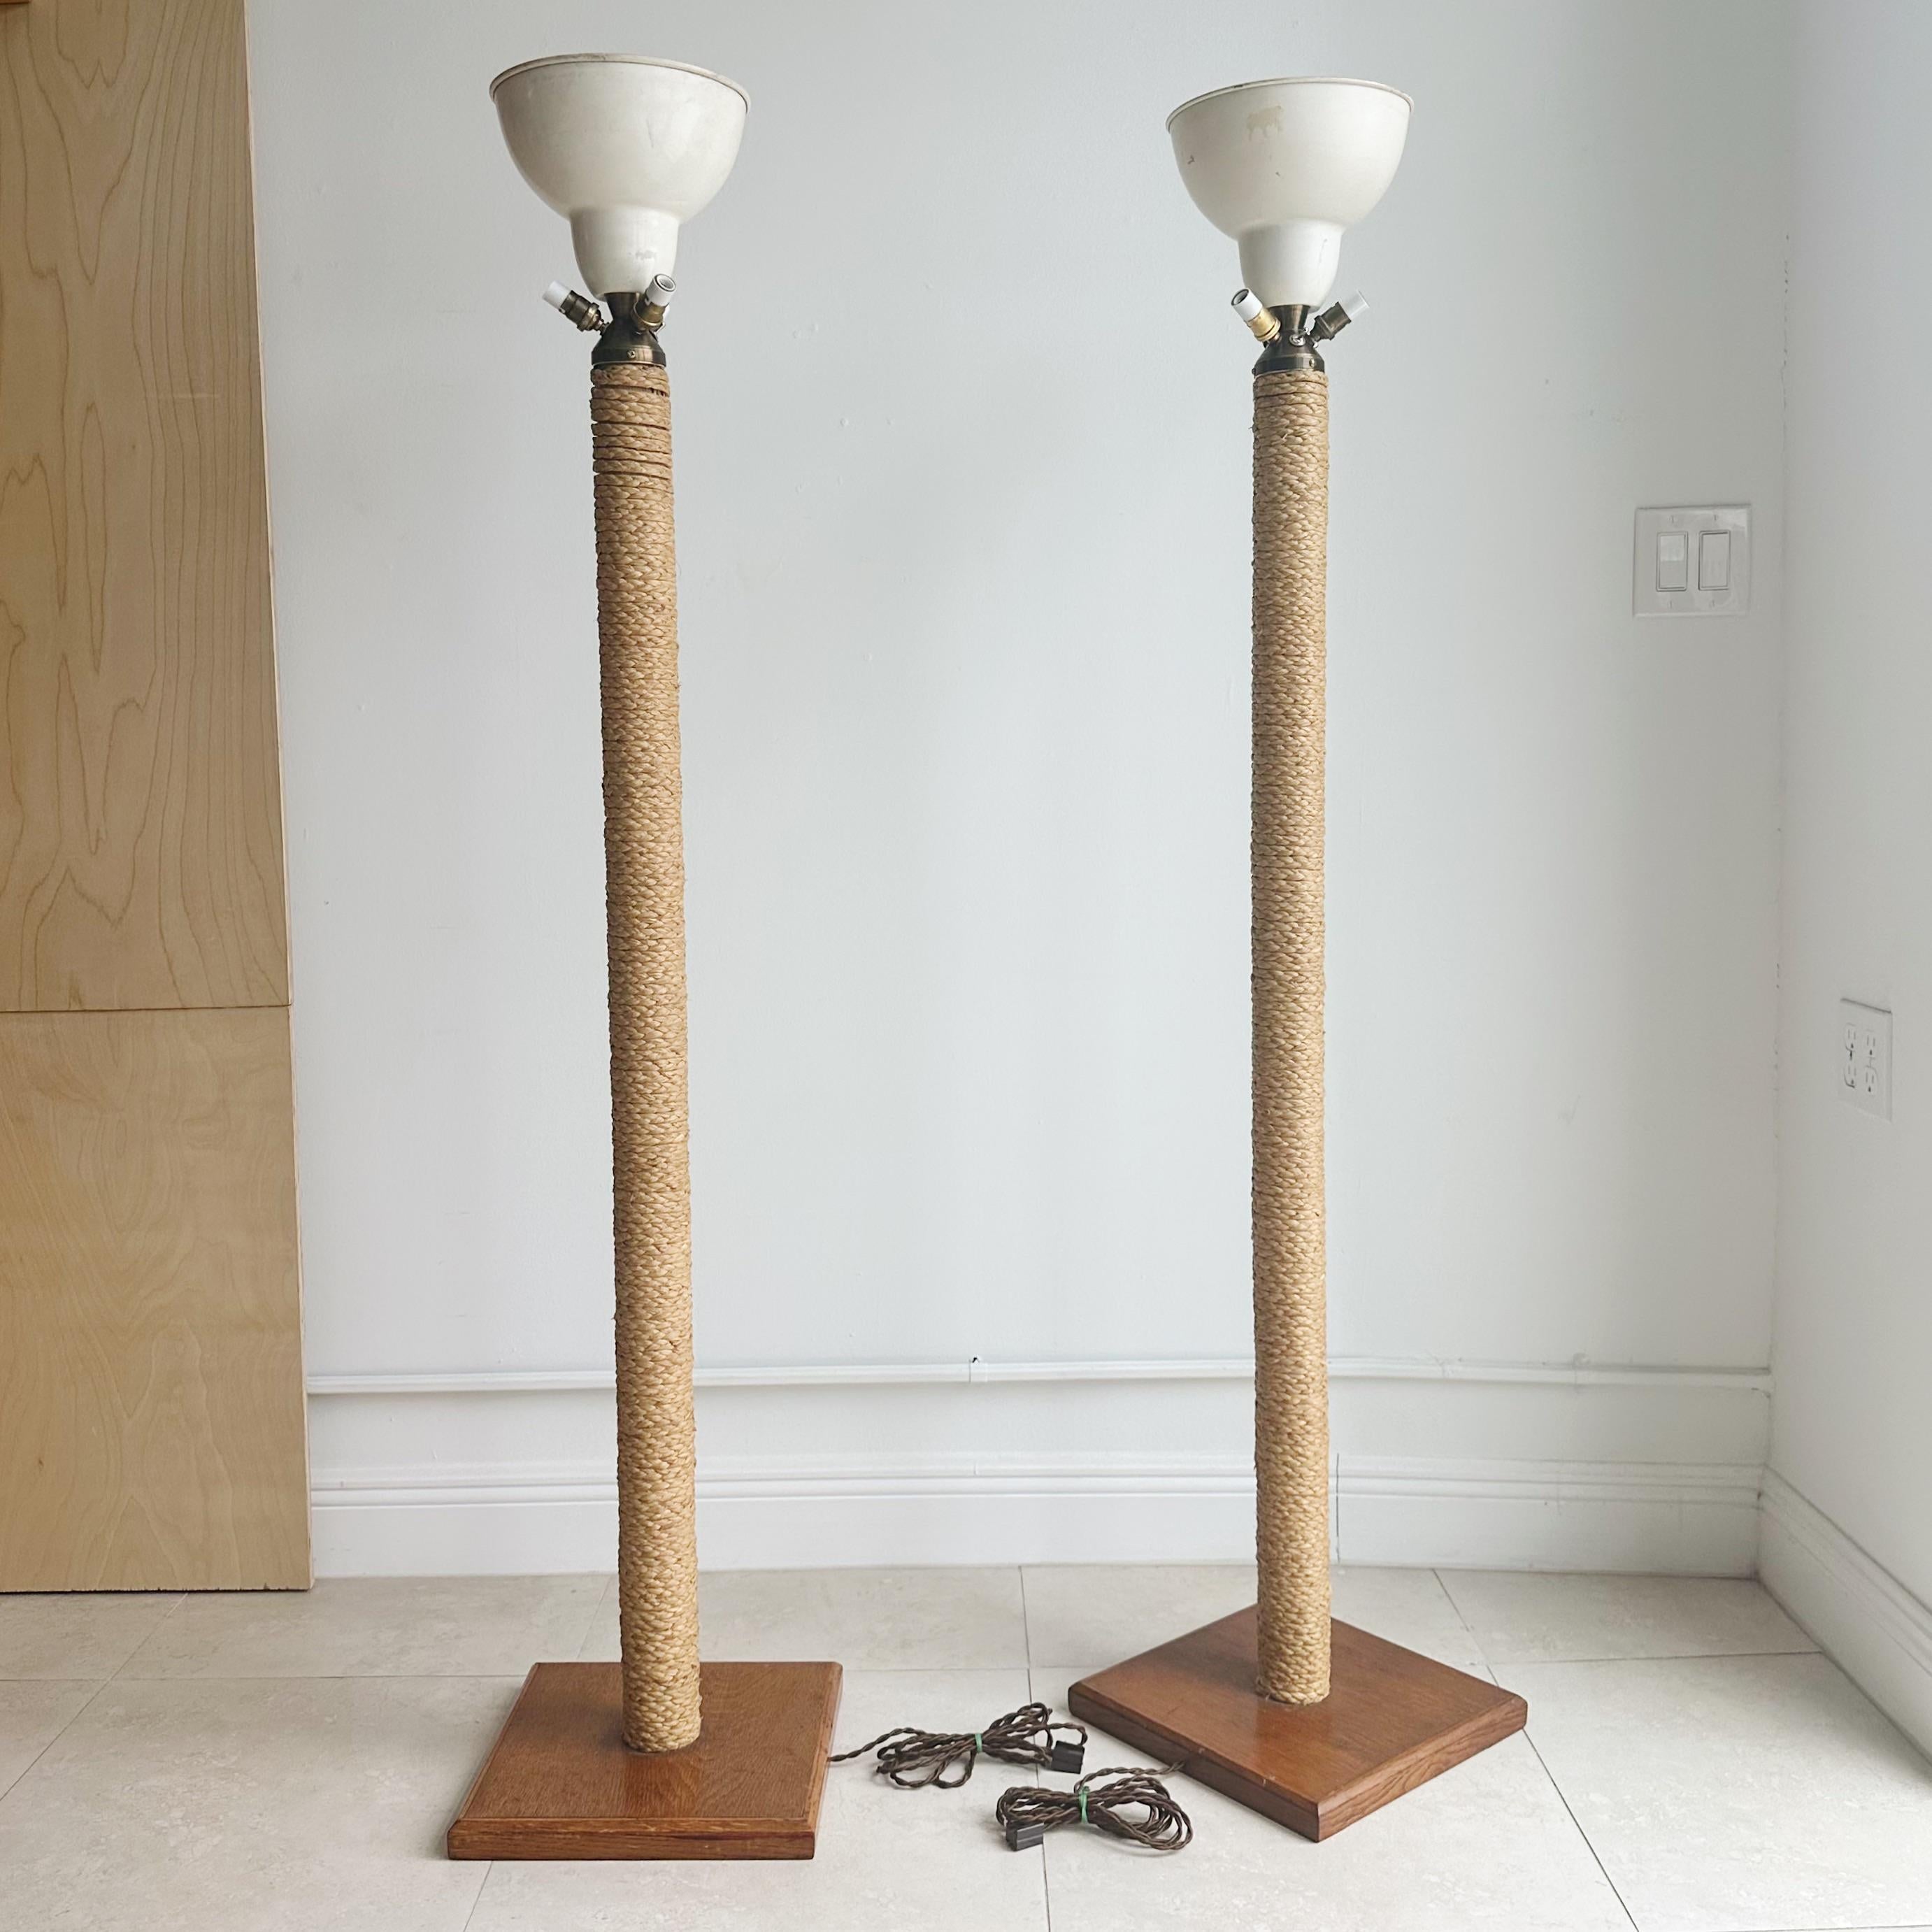 Pair of Adrien Audoux and Frida Minet Modern Rope Floor Lamps, France, 1950s For Sale 3